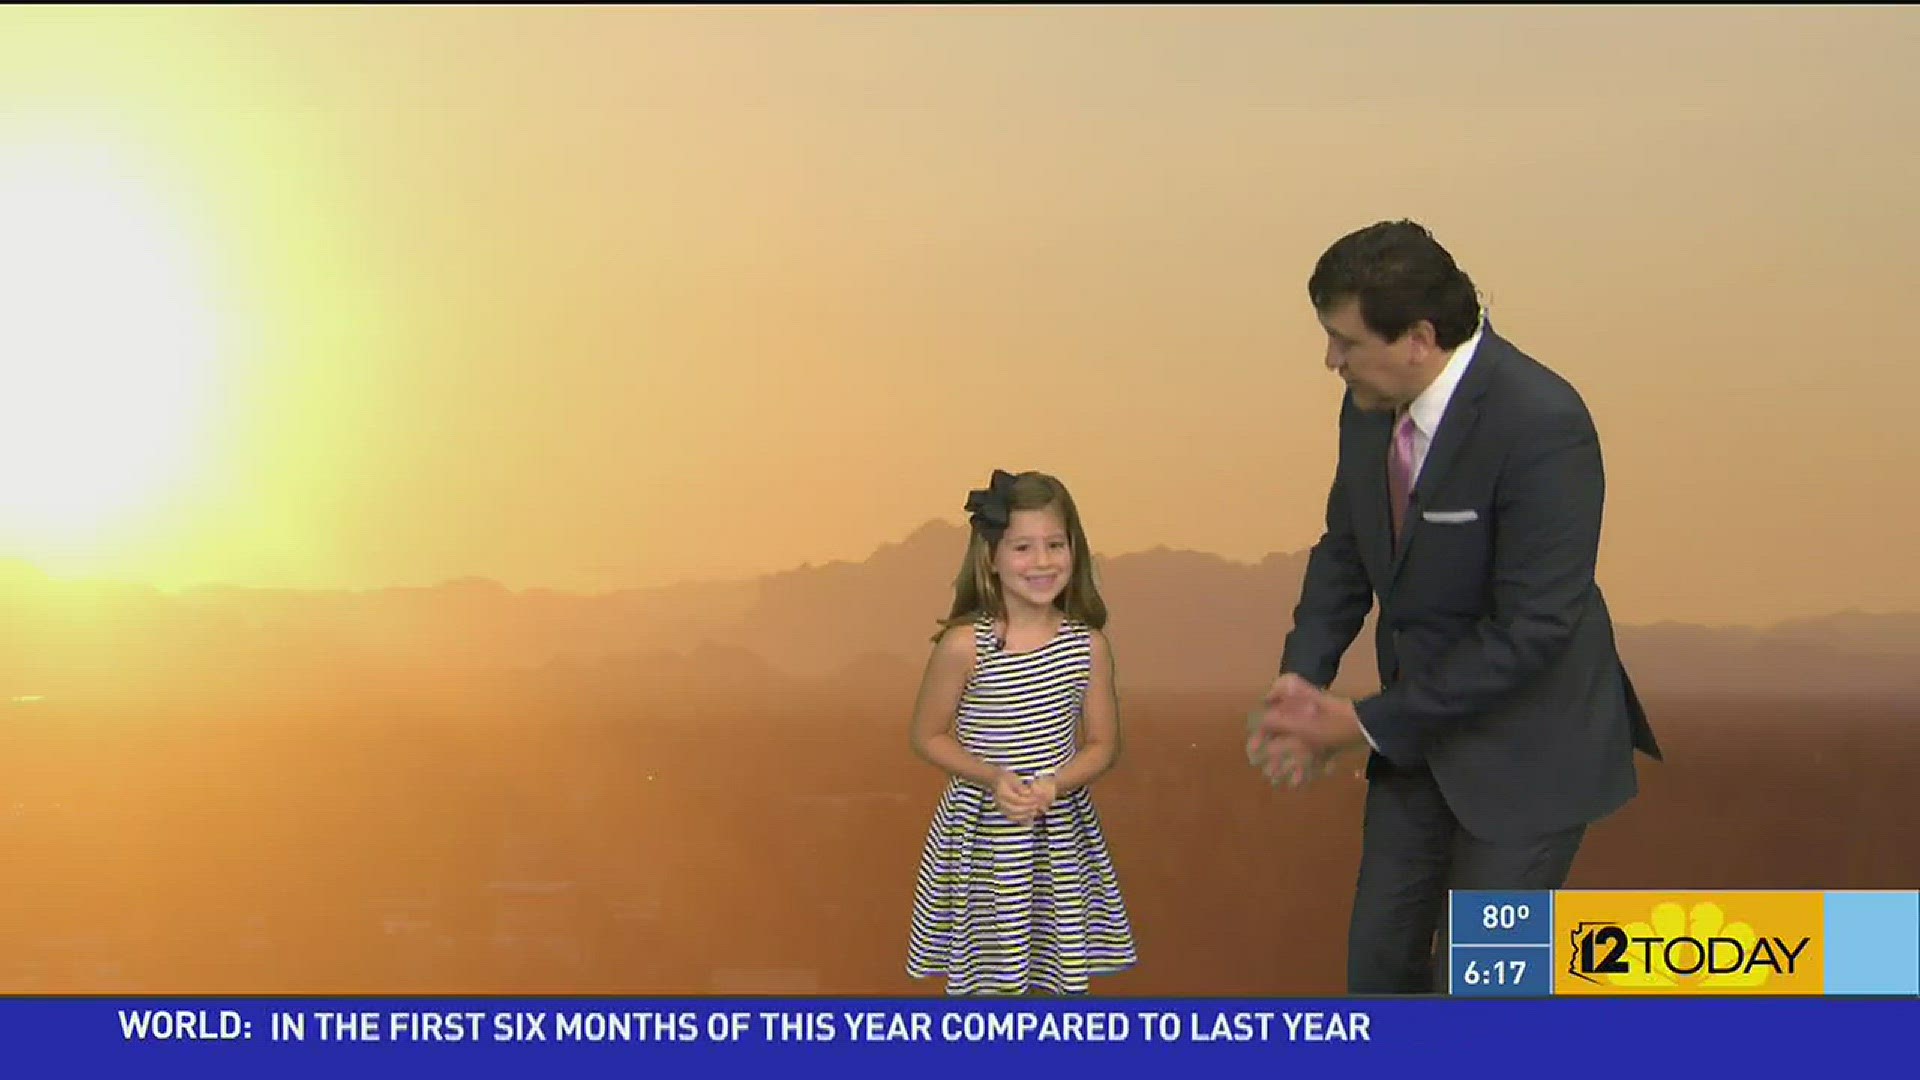 Lexi from Tempe helps Jimmy Q give weather update and 7-day forecast.